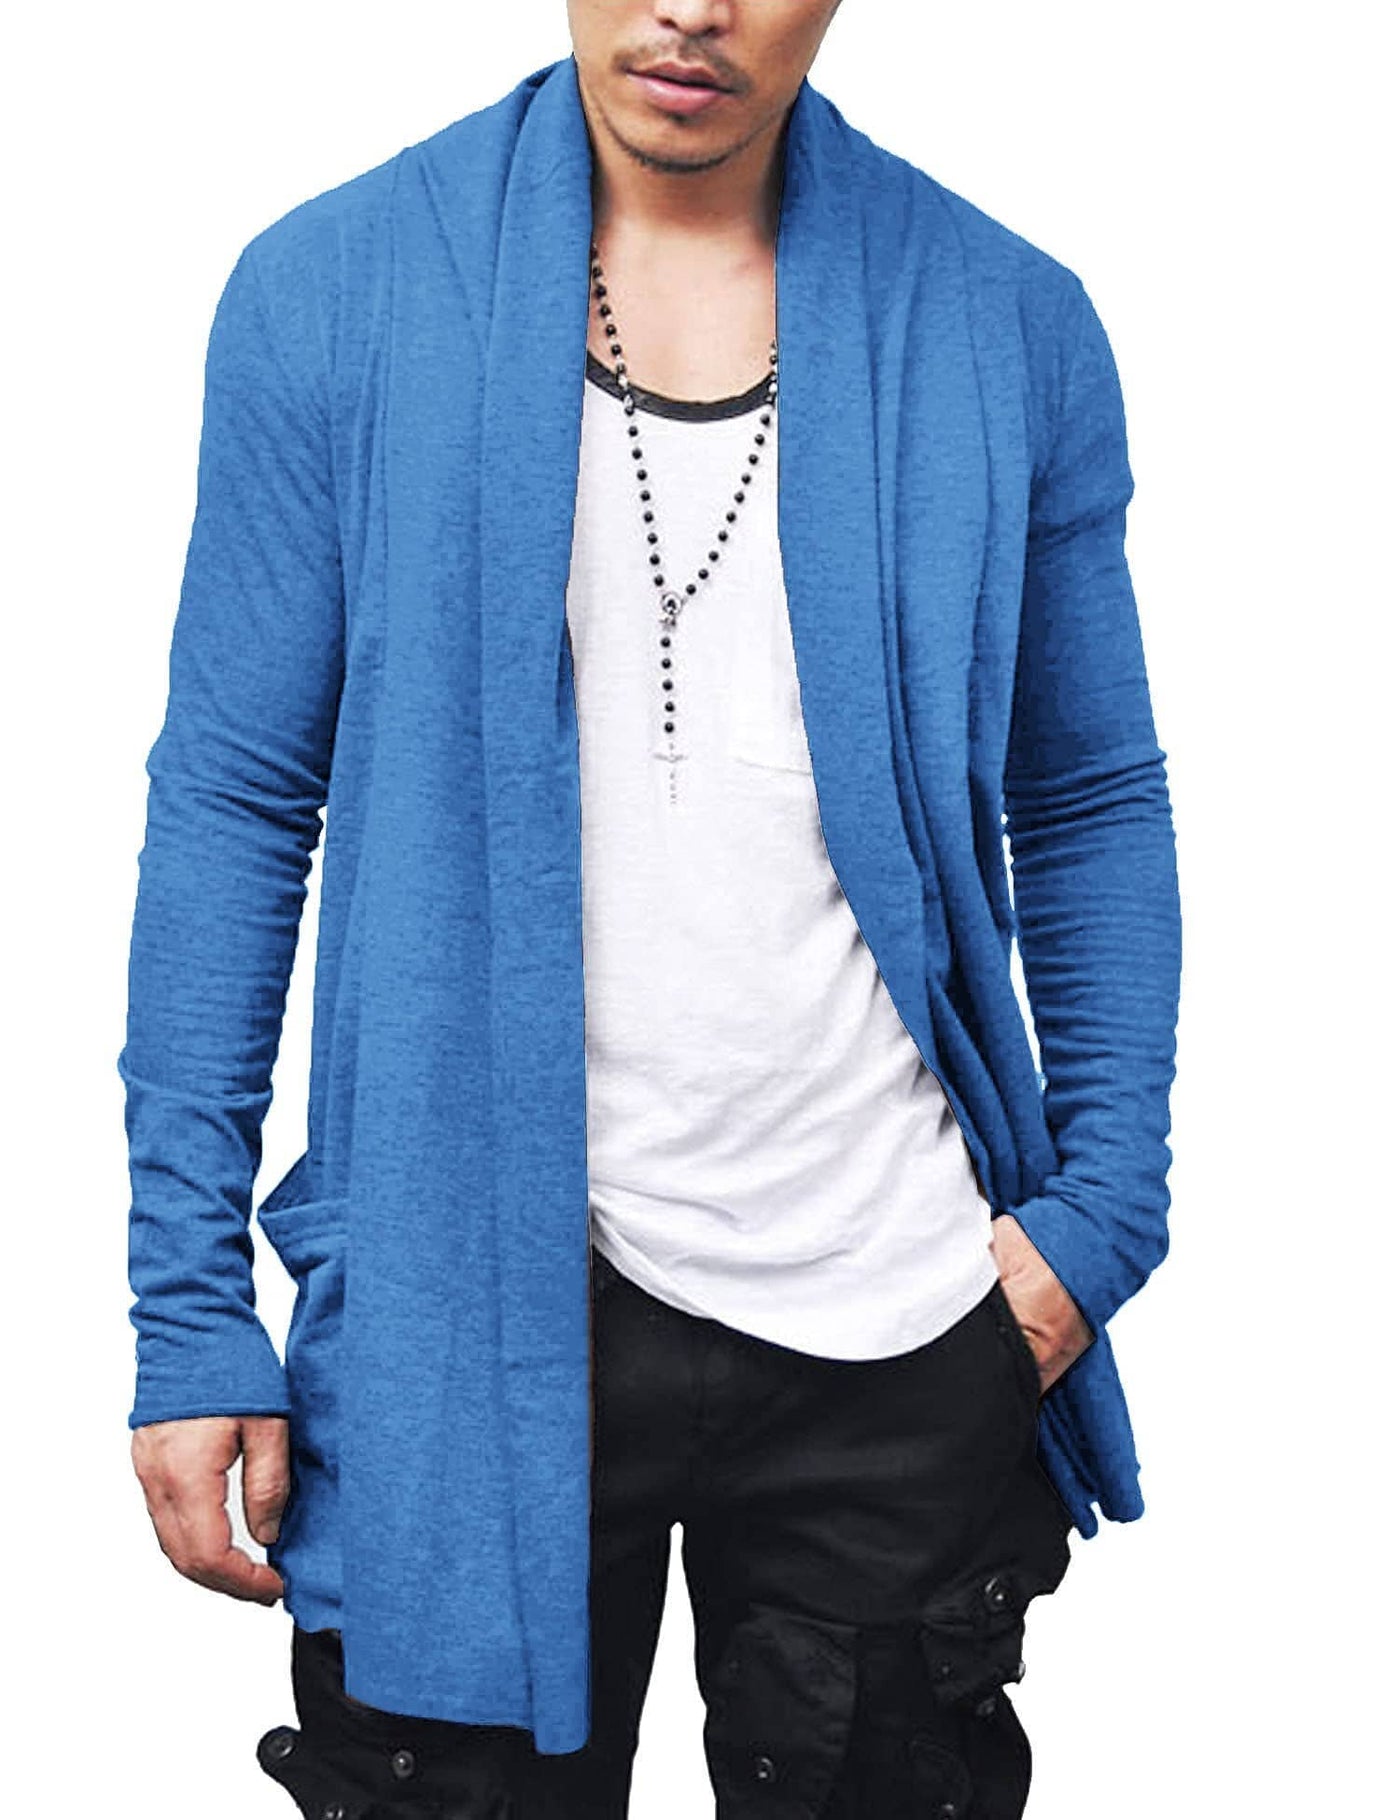 Ruffle Shawl Collar Knitted Cardigan (US Only) Cardigans COOFANDY Store Blue S 